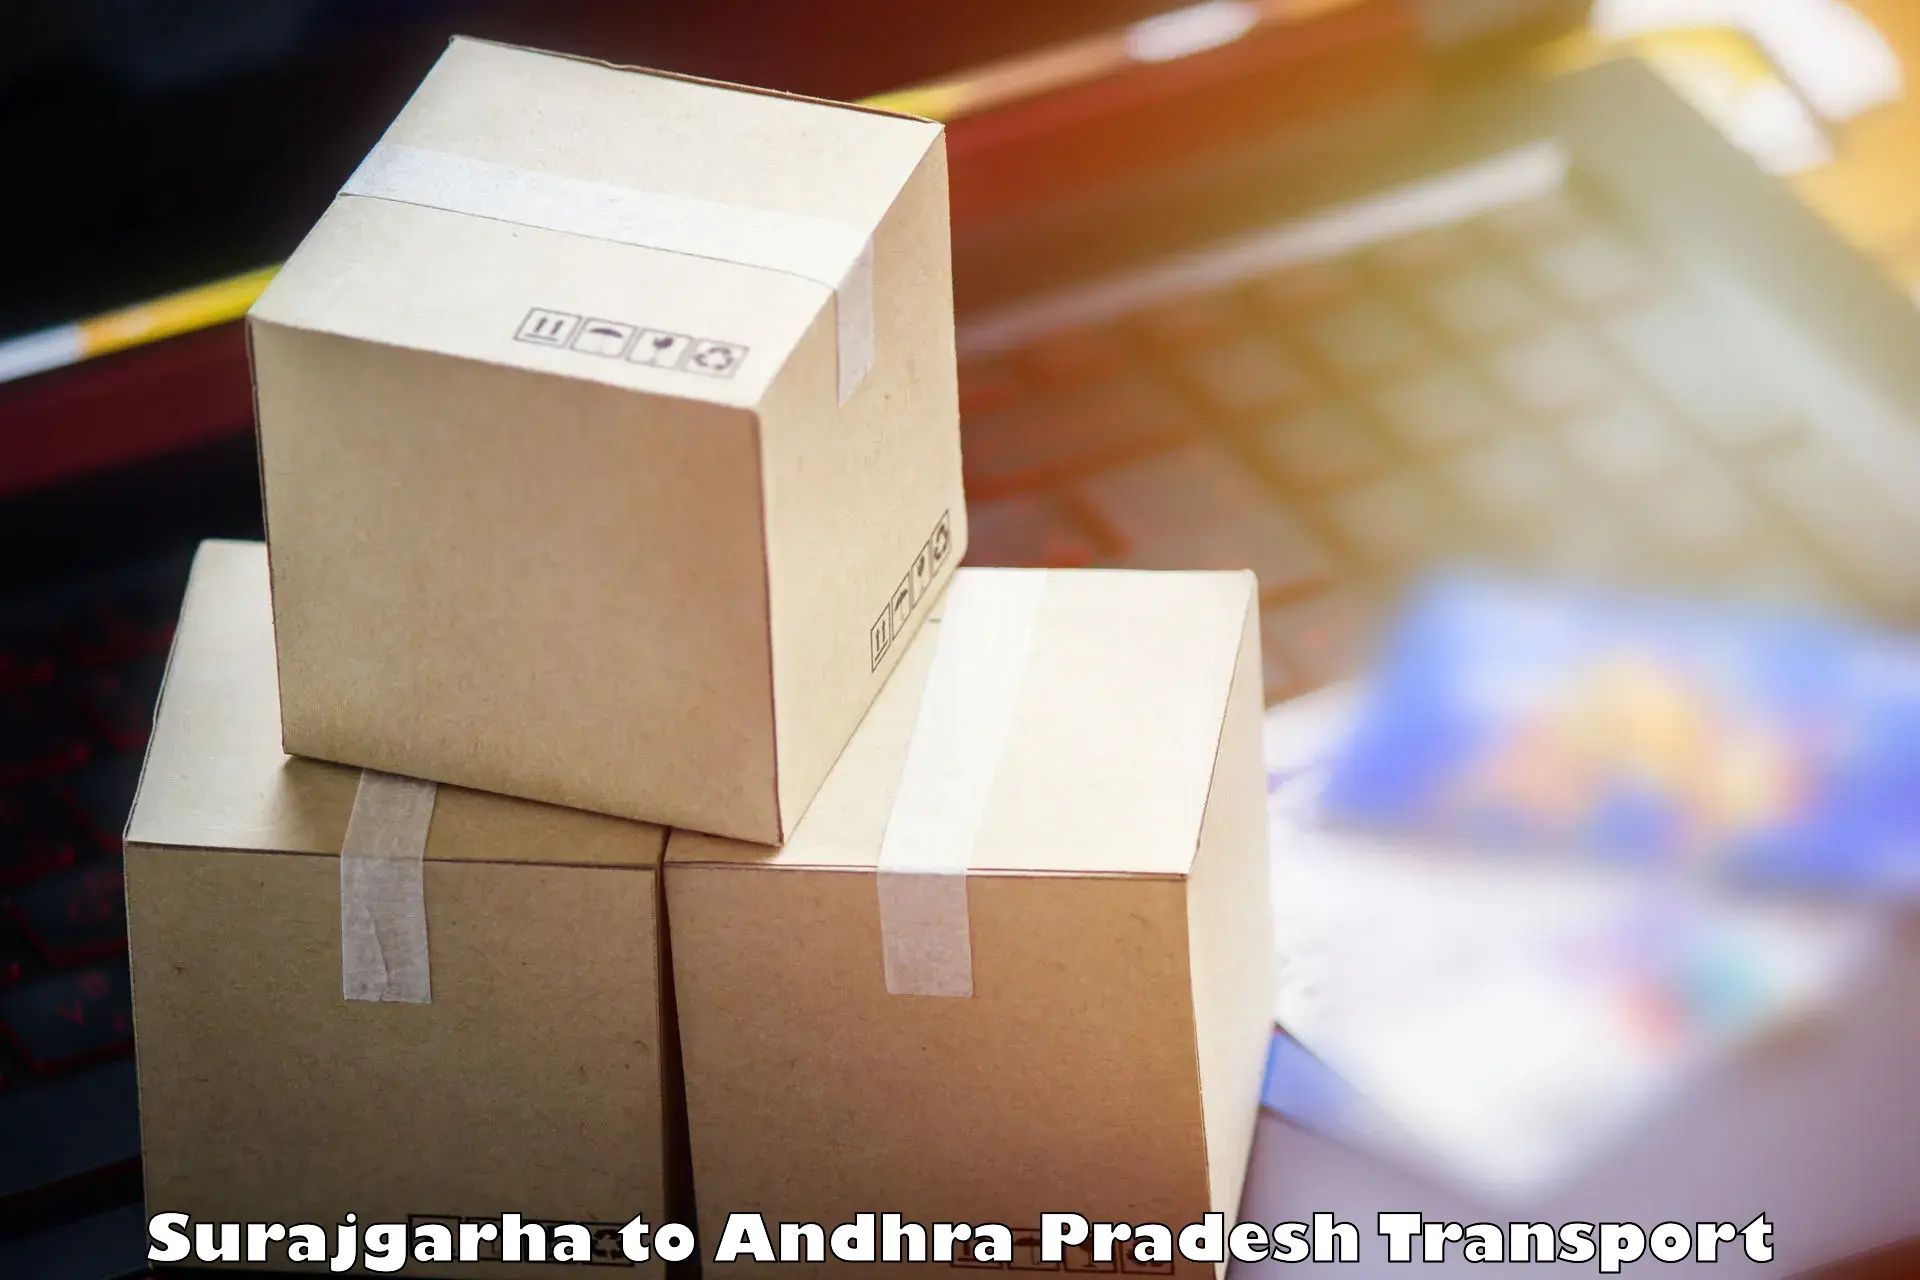 Truck transport companies in India Surajgarha to Anantapur